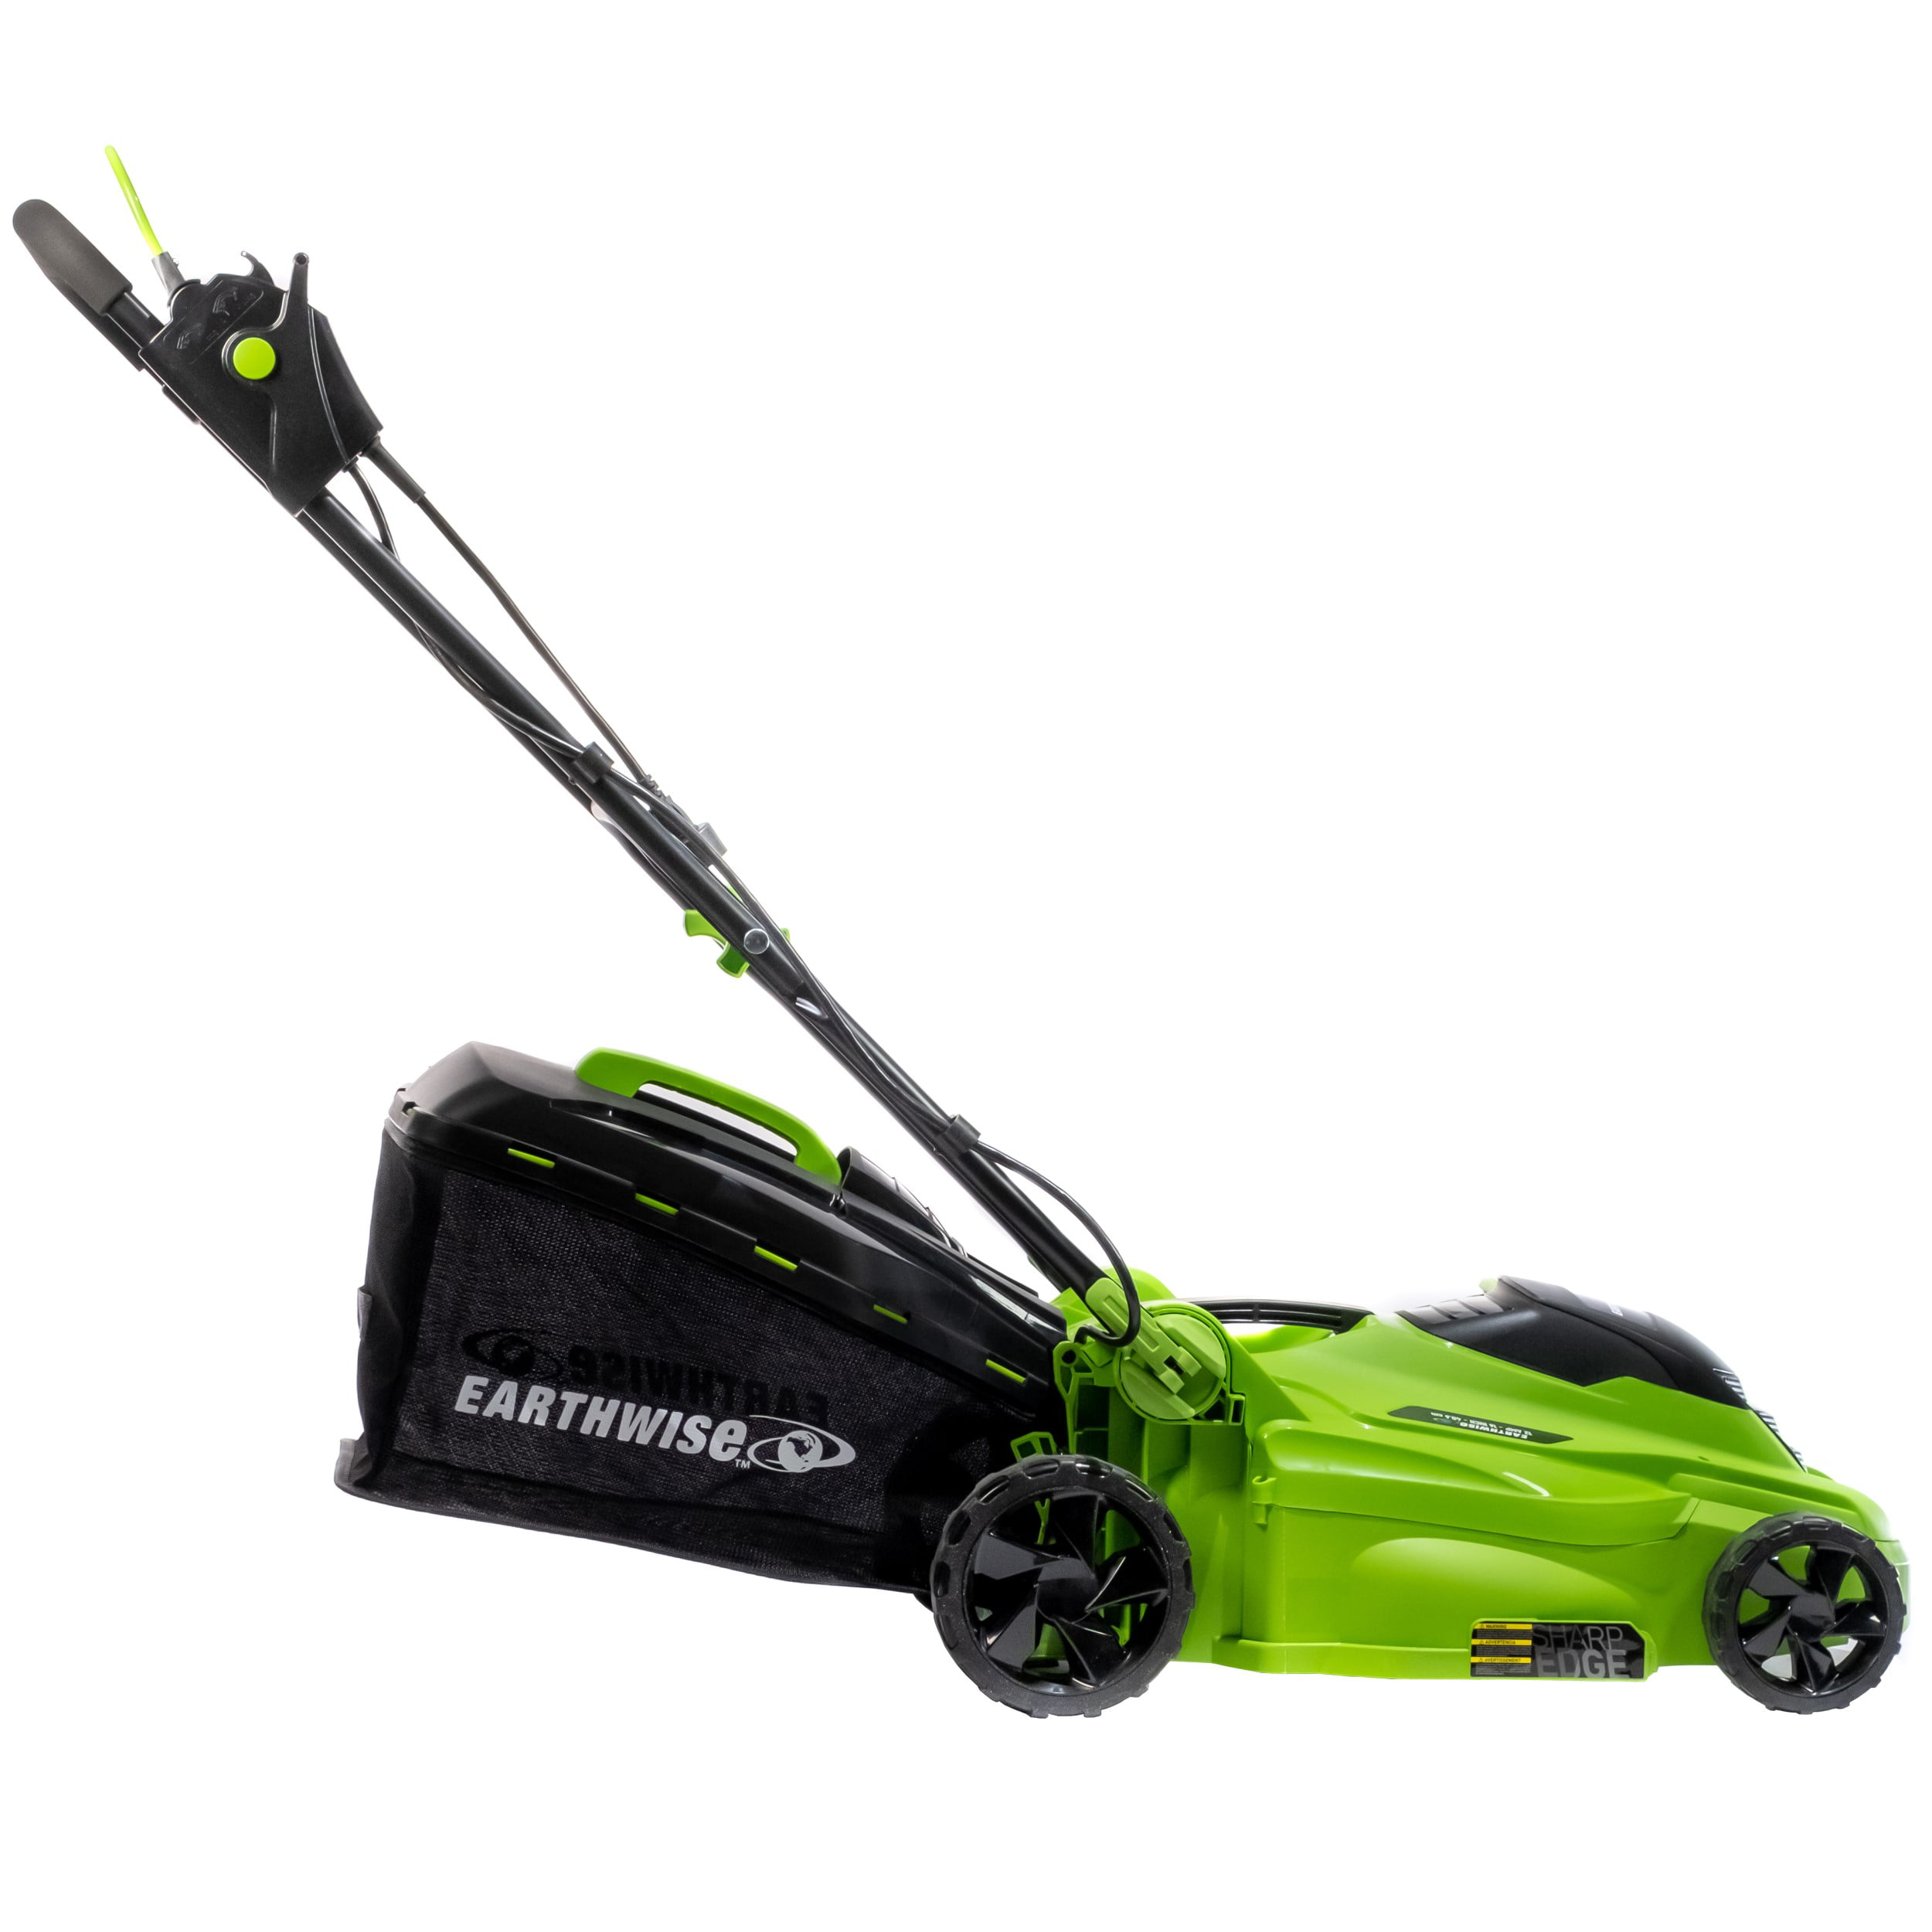 Earthwise 50616 16-Inch 11-Amp Corded Electric Lawn Mower - 2